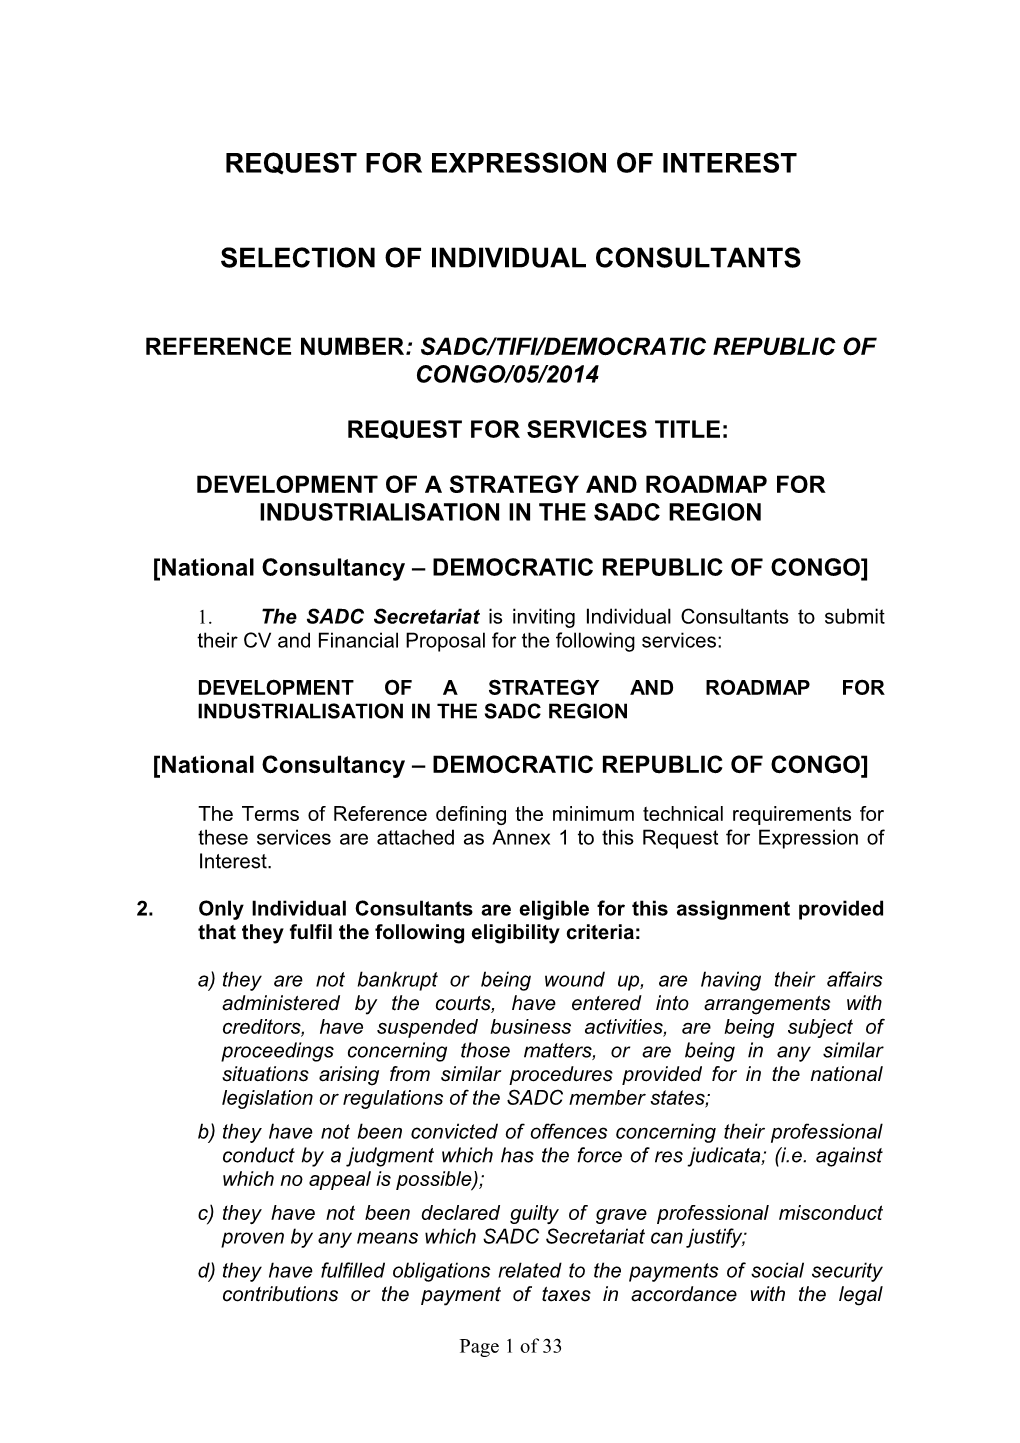 Reference Number: Sadc/Tifi/Democratic Republic of Congo/05/2014 Development of a Strategy